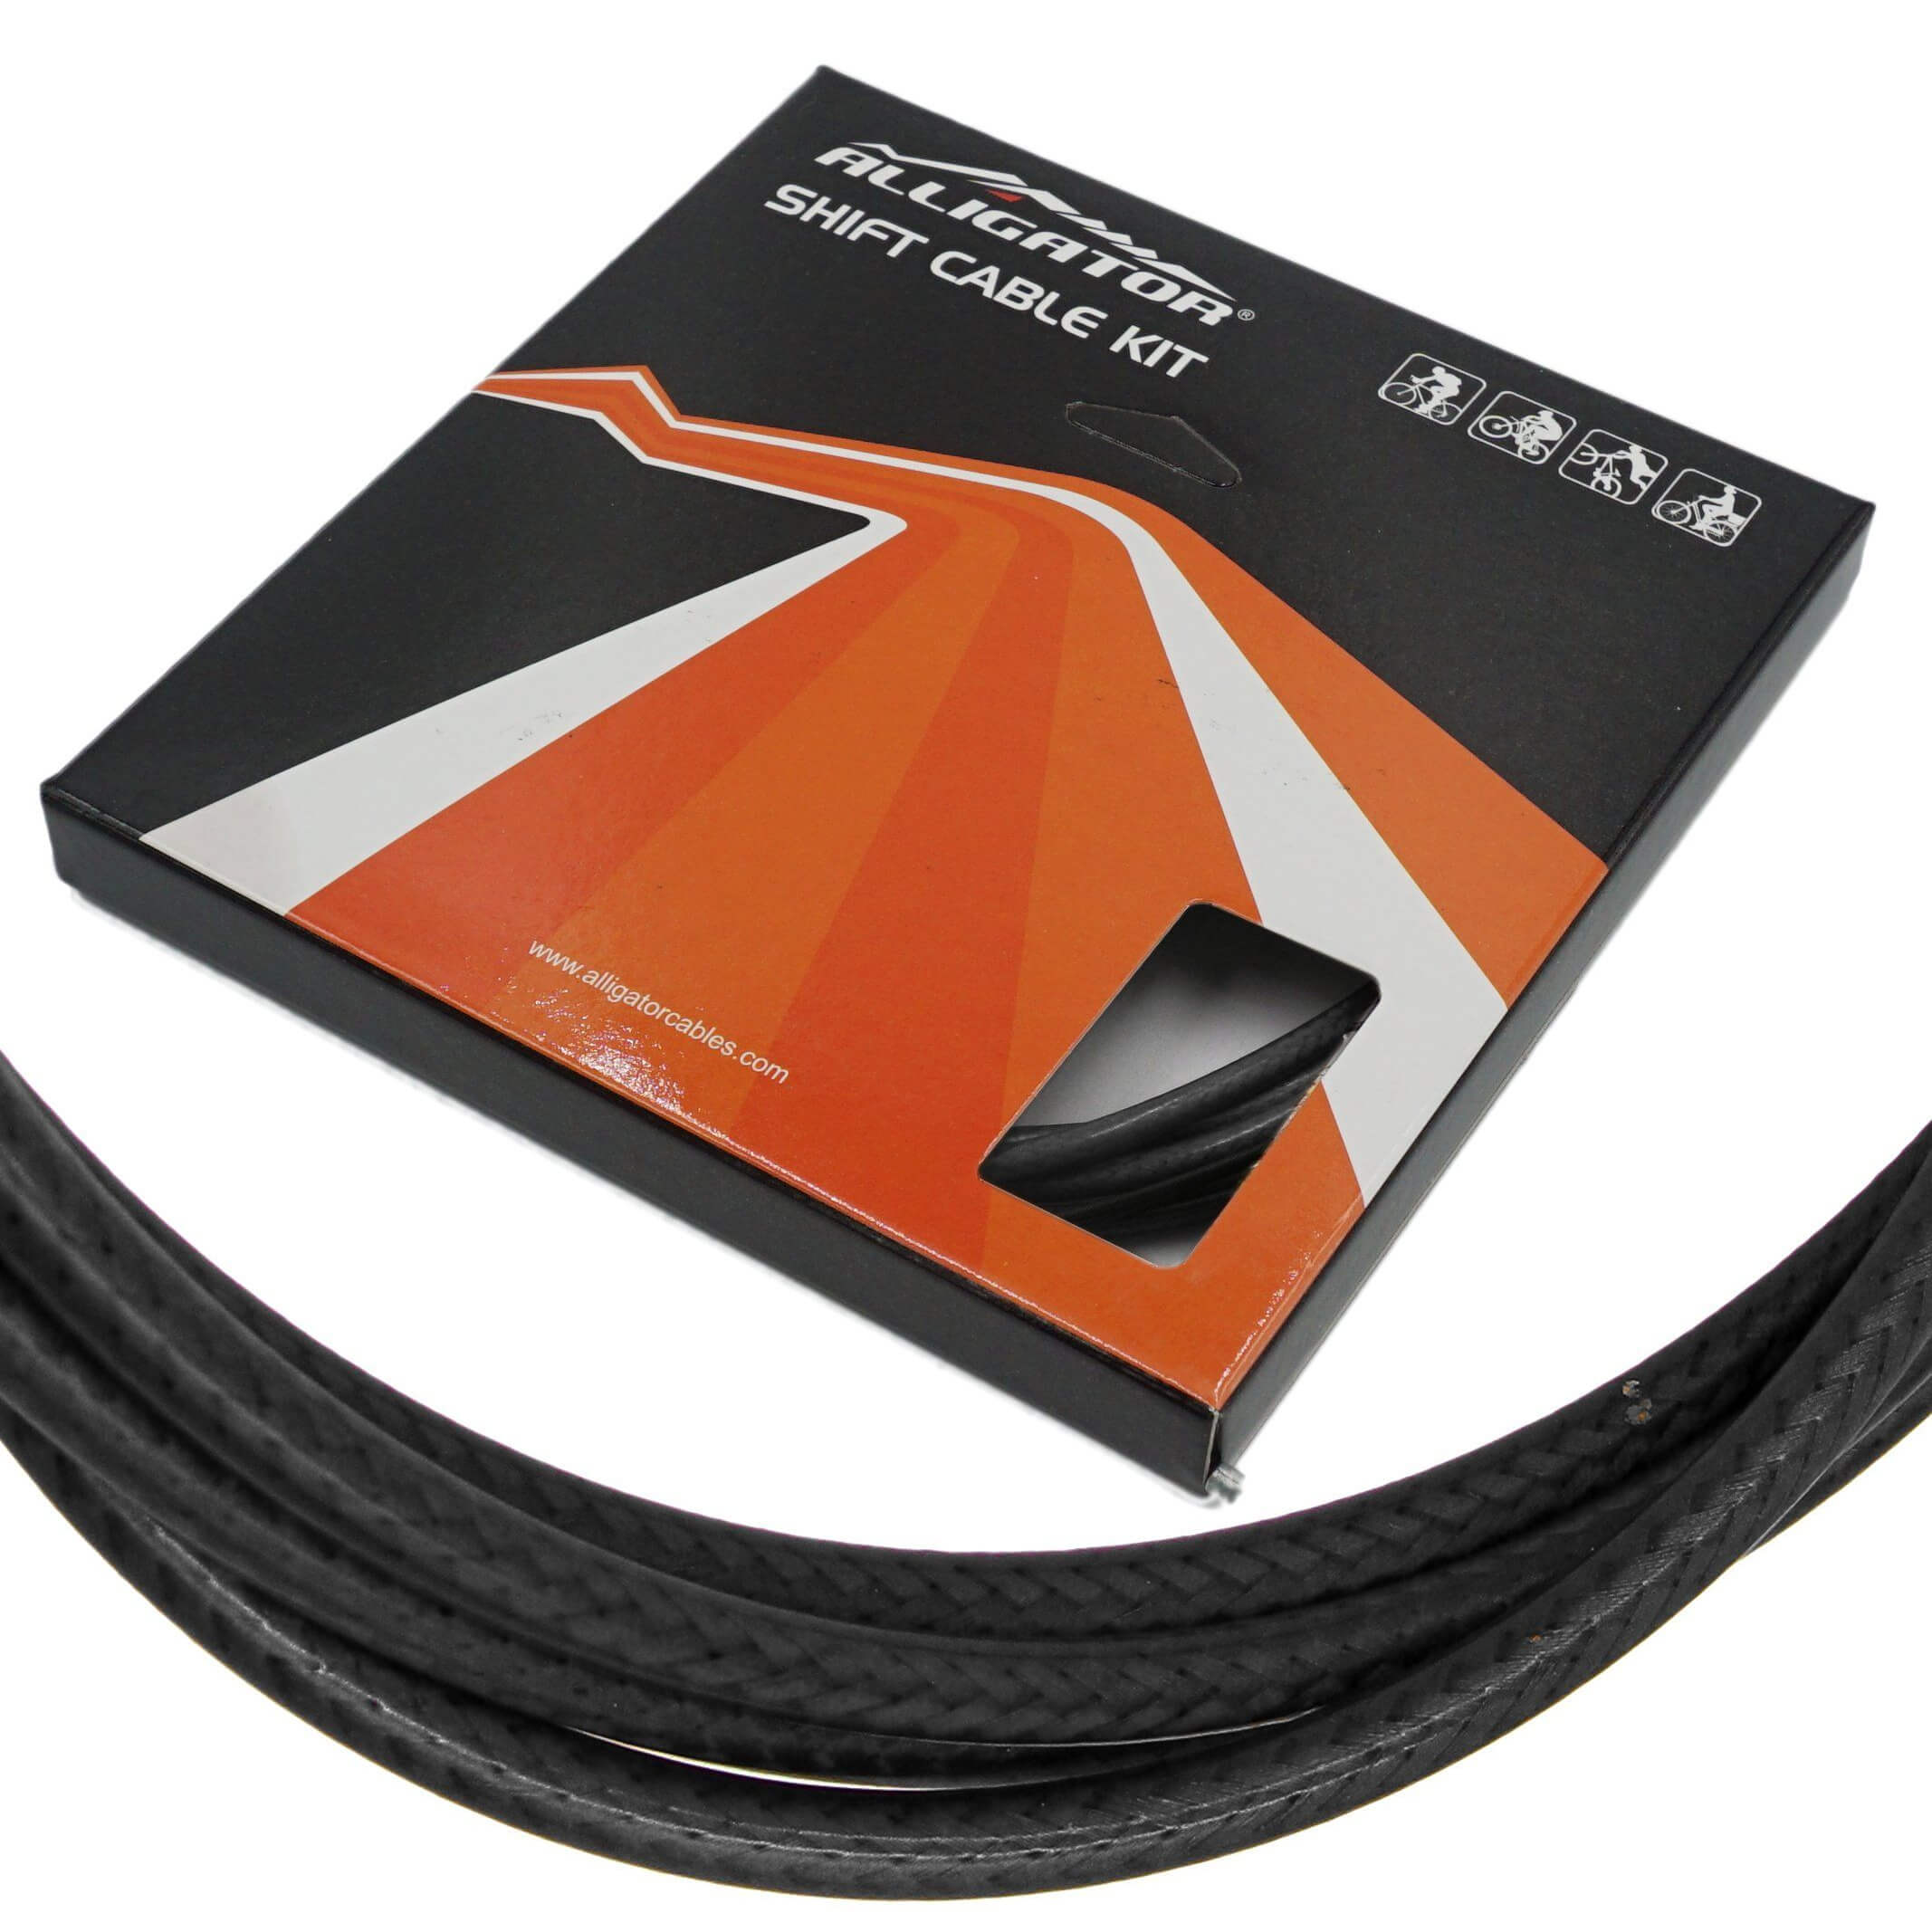 Alligator Sleek Guide 5mm PTFE/SS Shift Cable/Housing Set Front and Rear - TheBikesmiths